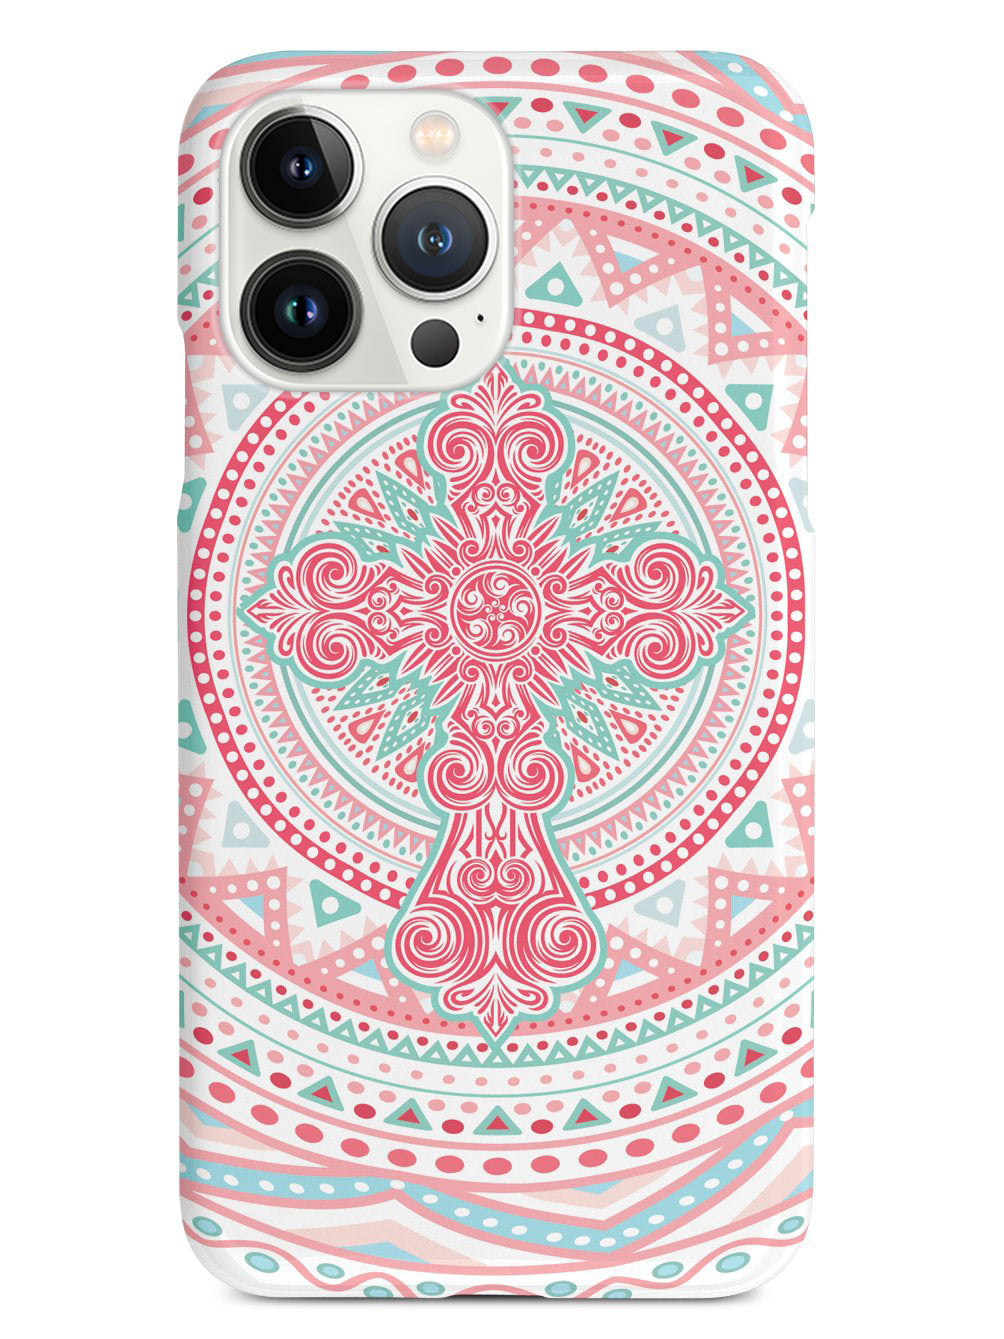 Ornate Cross - Coral and Mint Case